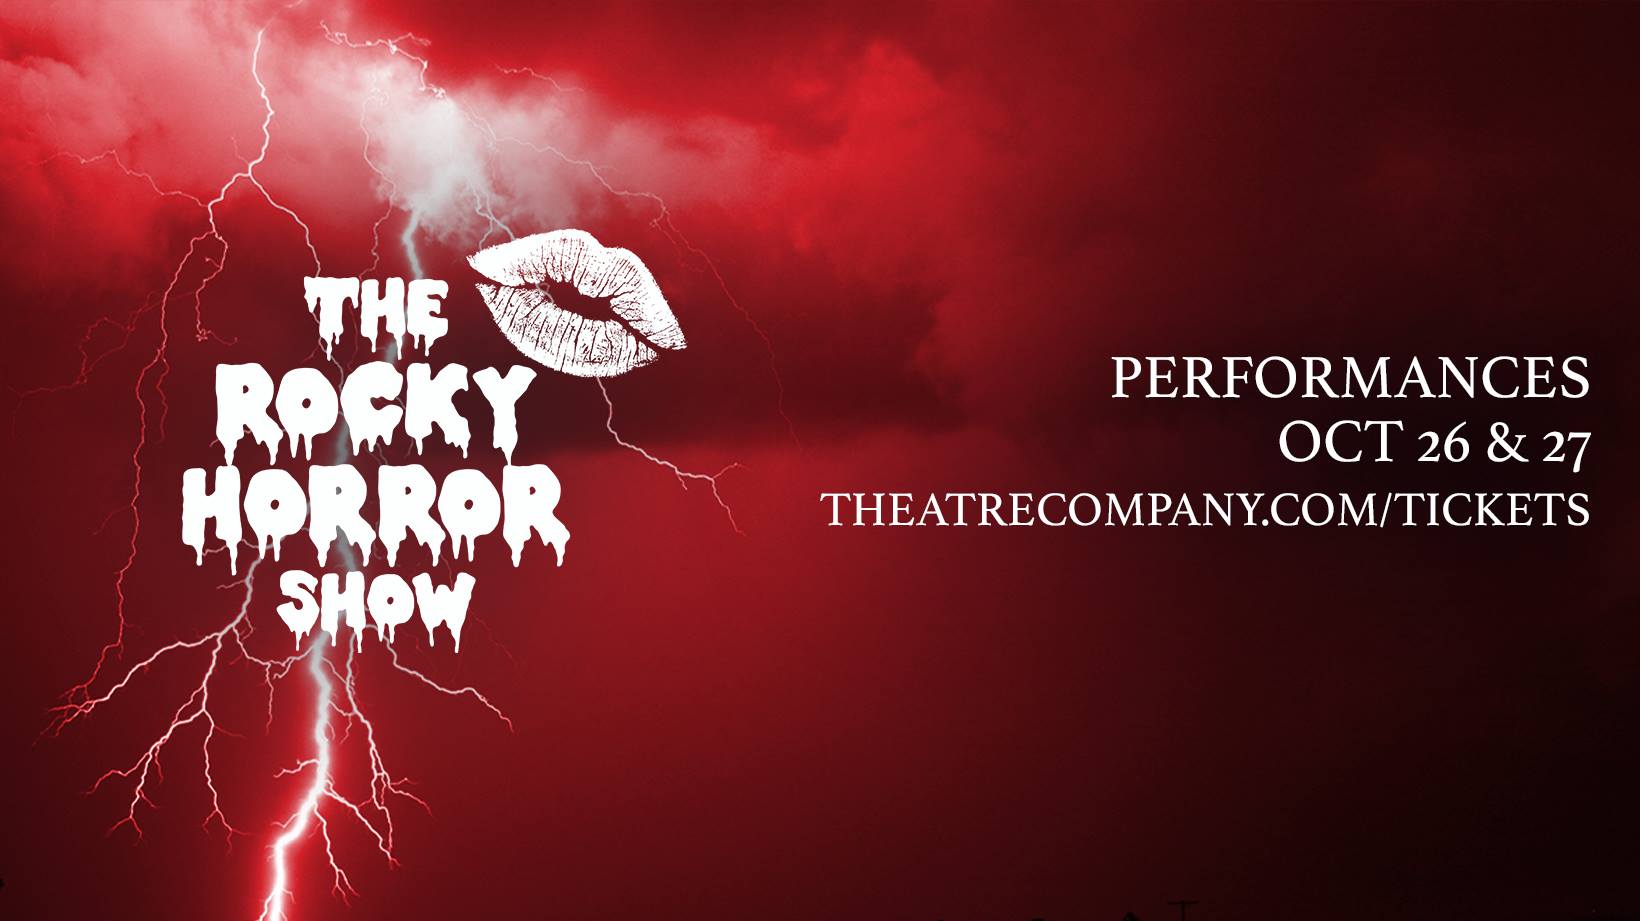 The Rocky Horror Show by The Theatre Company